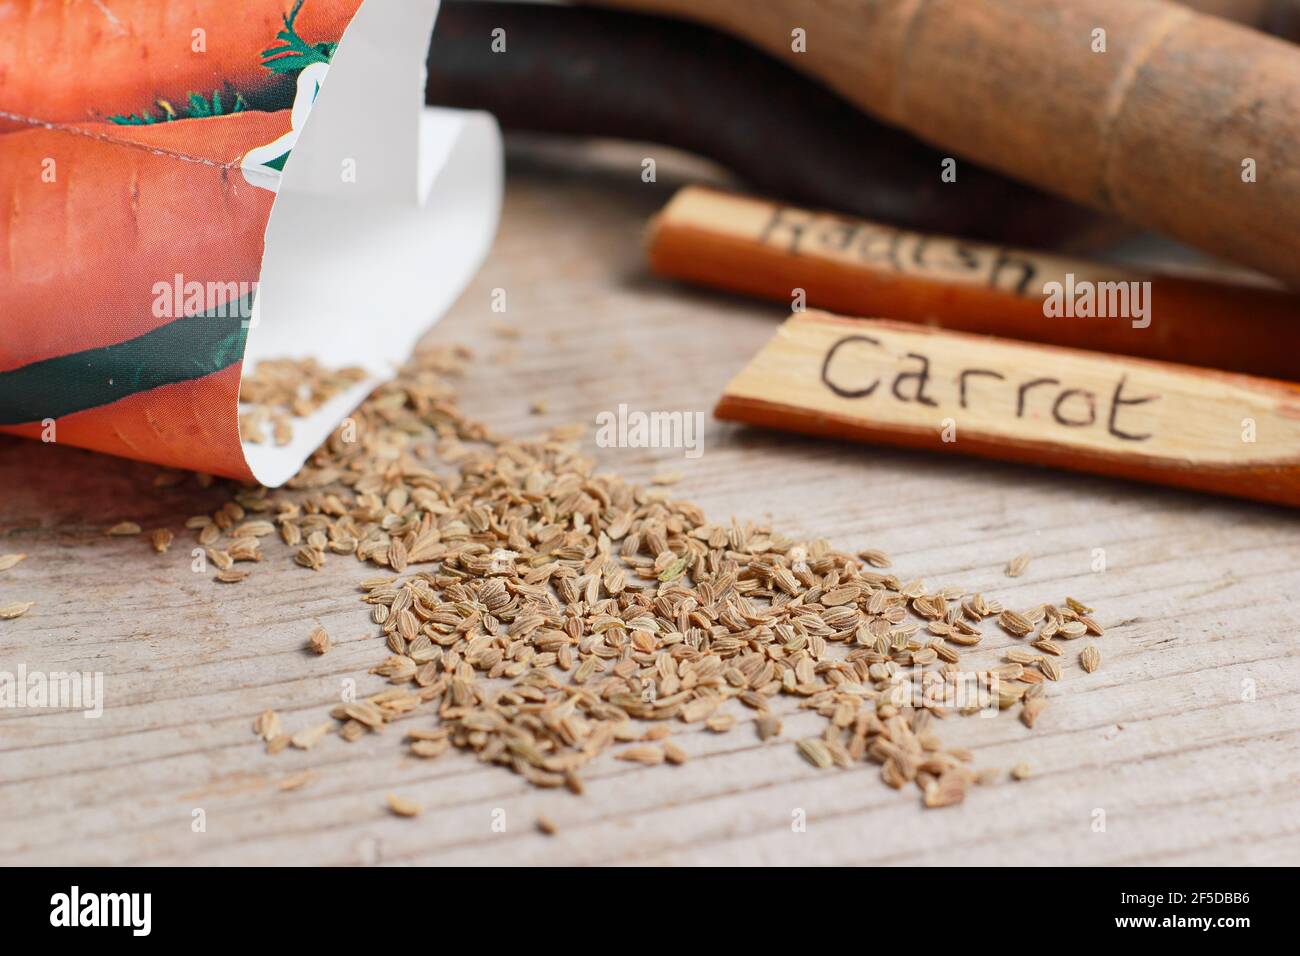 Daucus carota. Carrot seed ready for sowing. UK Stock Photo